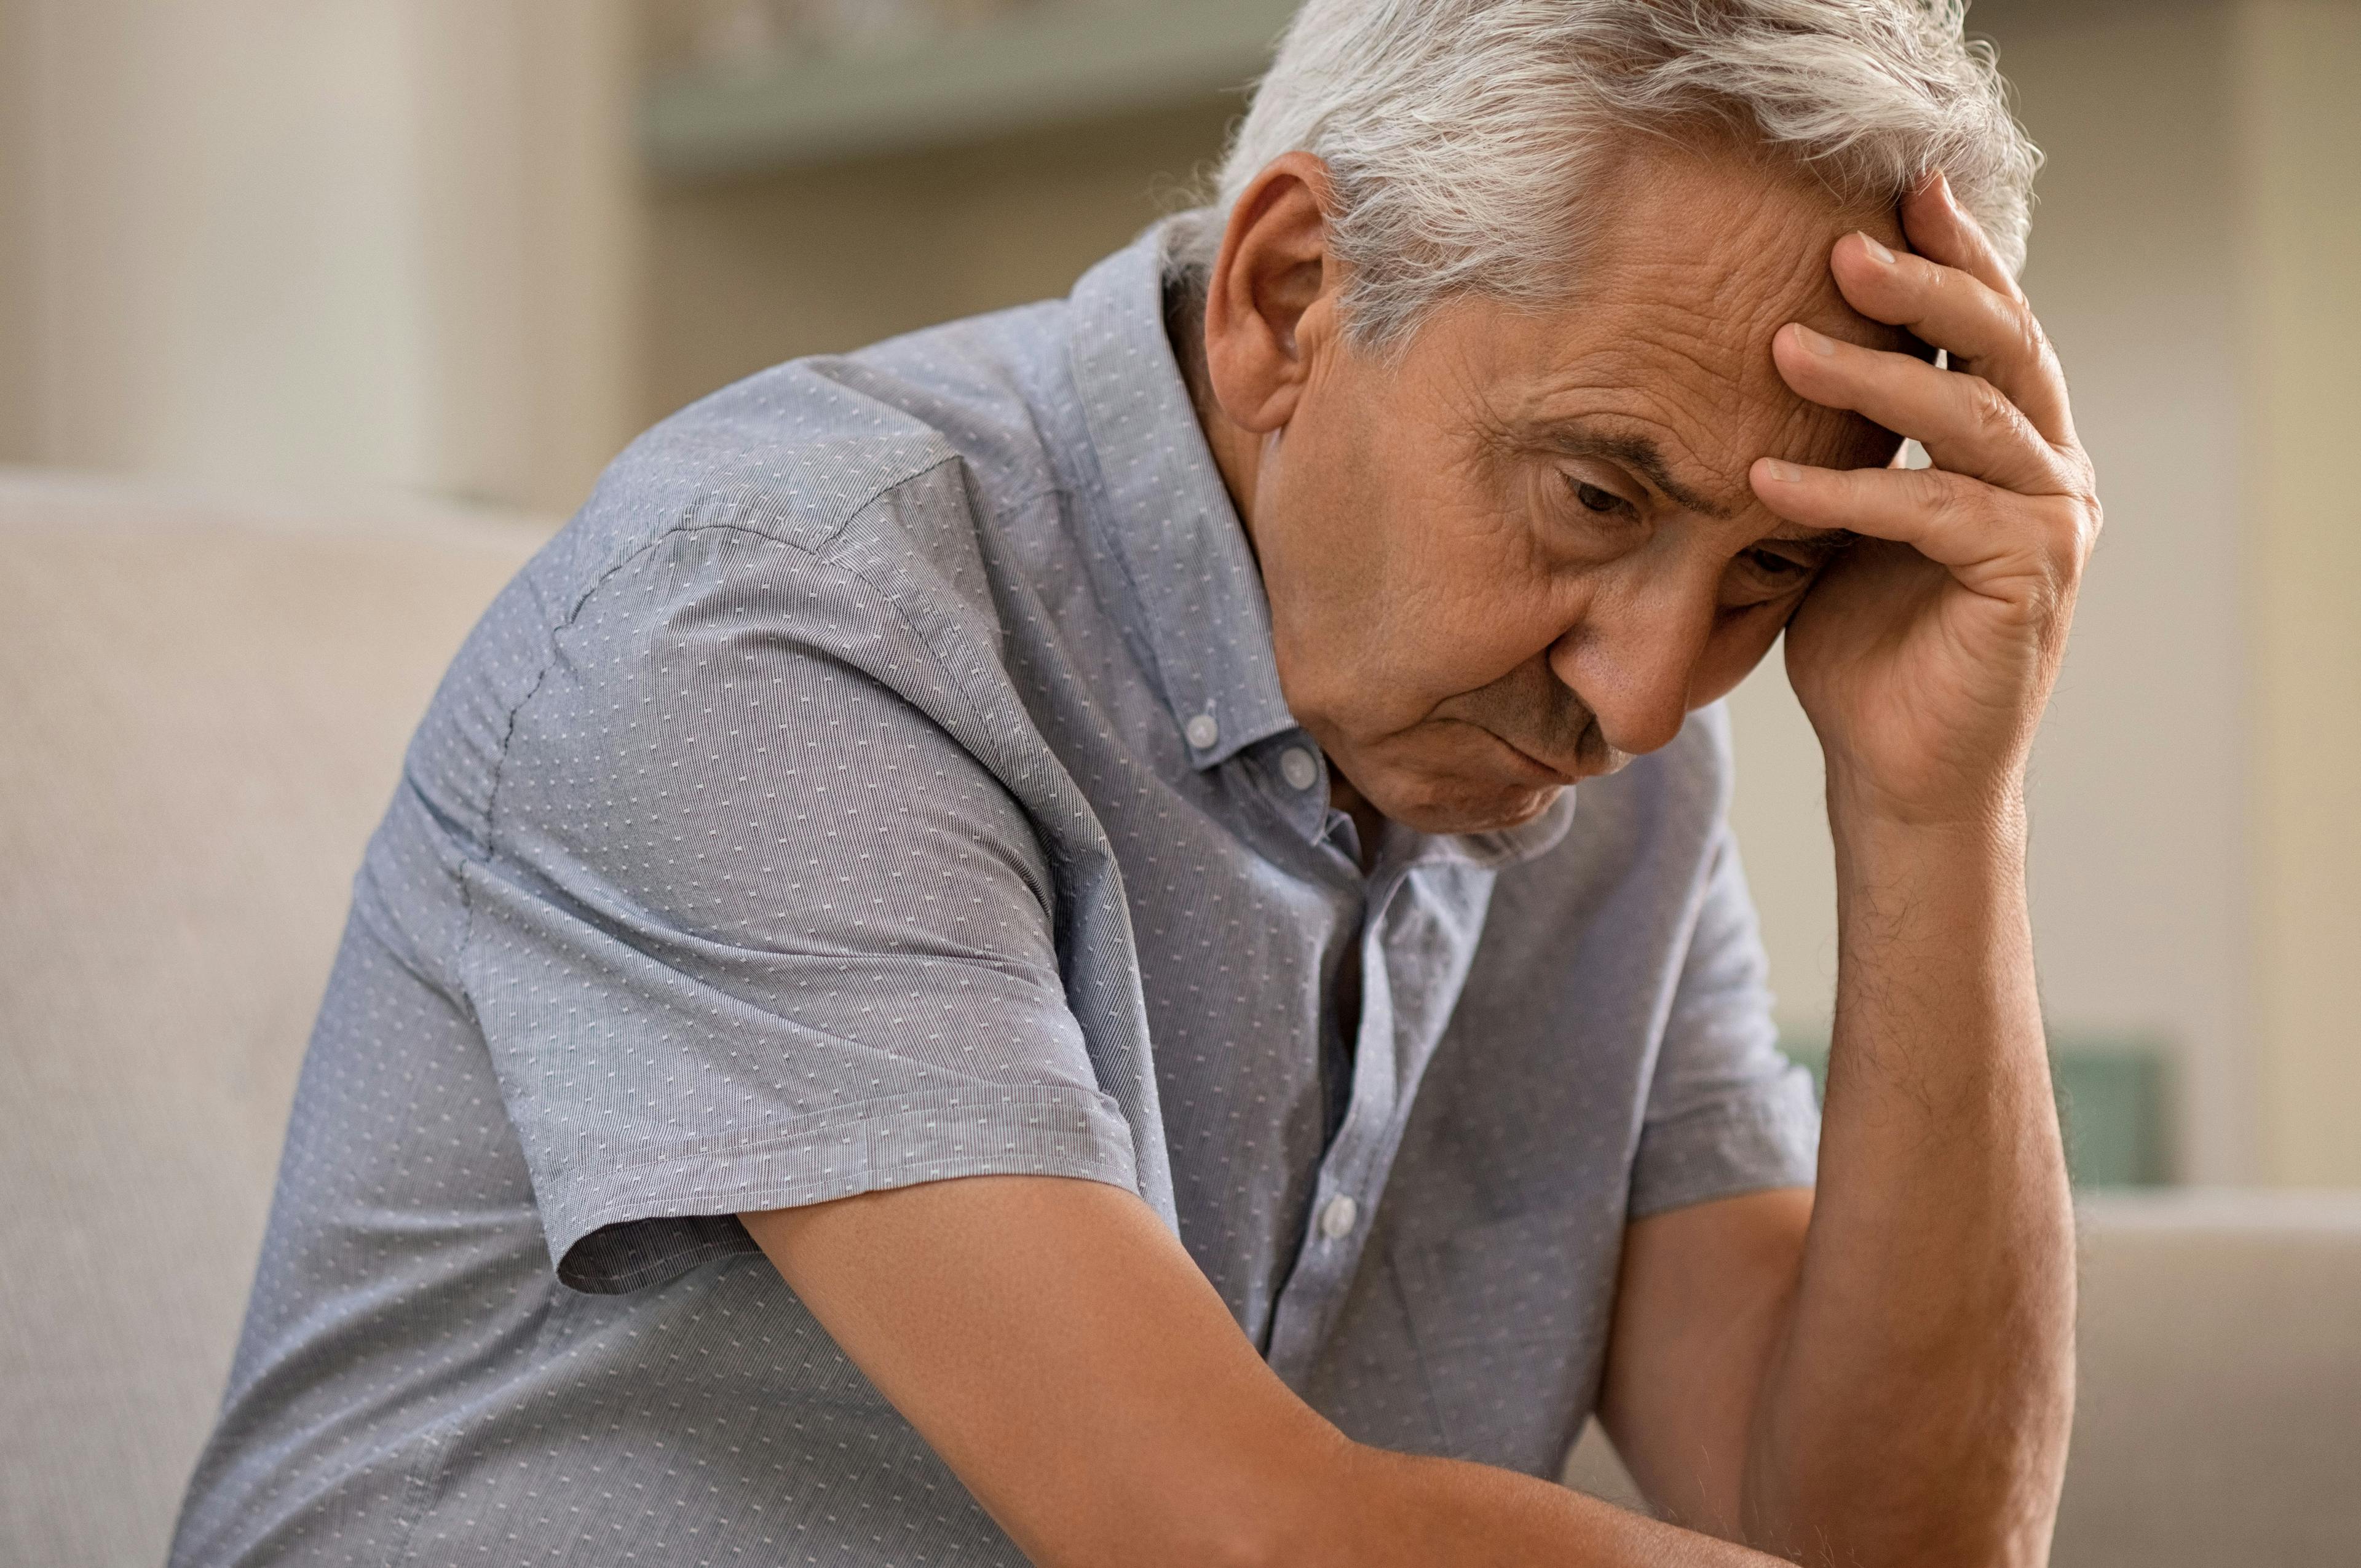 COVID-19 Pandemic Increased Rates of Depression in Older Adults With Cancer